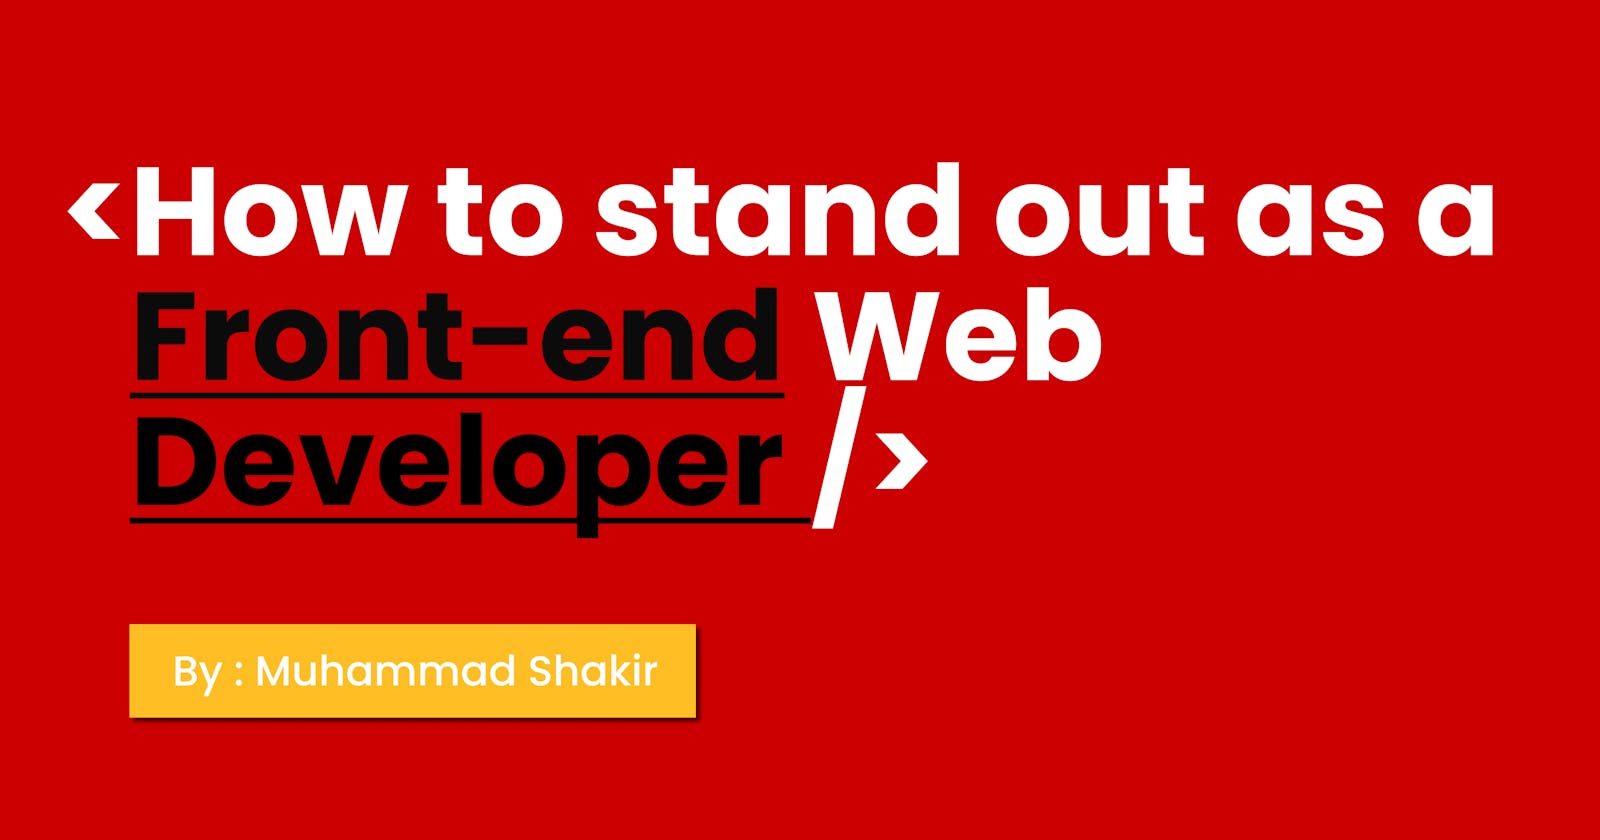 How to stand out as a front-end developer.